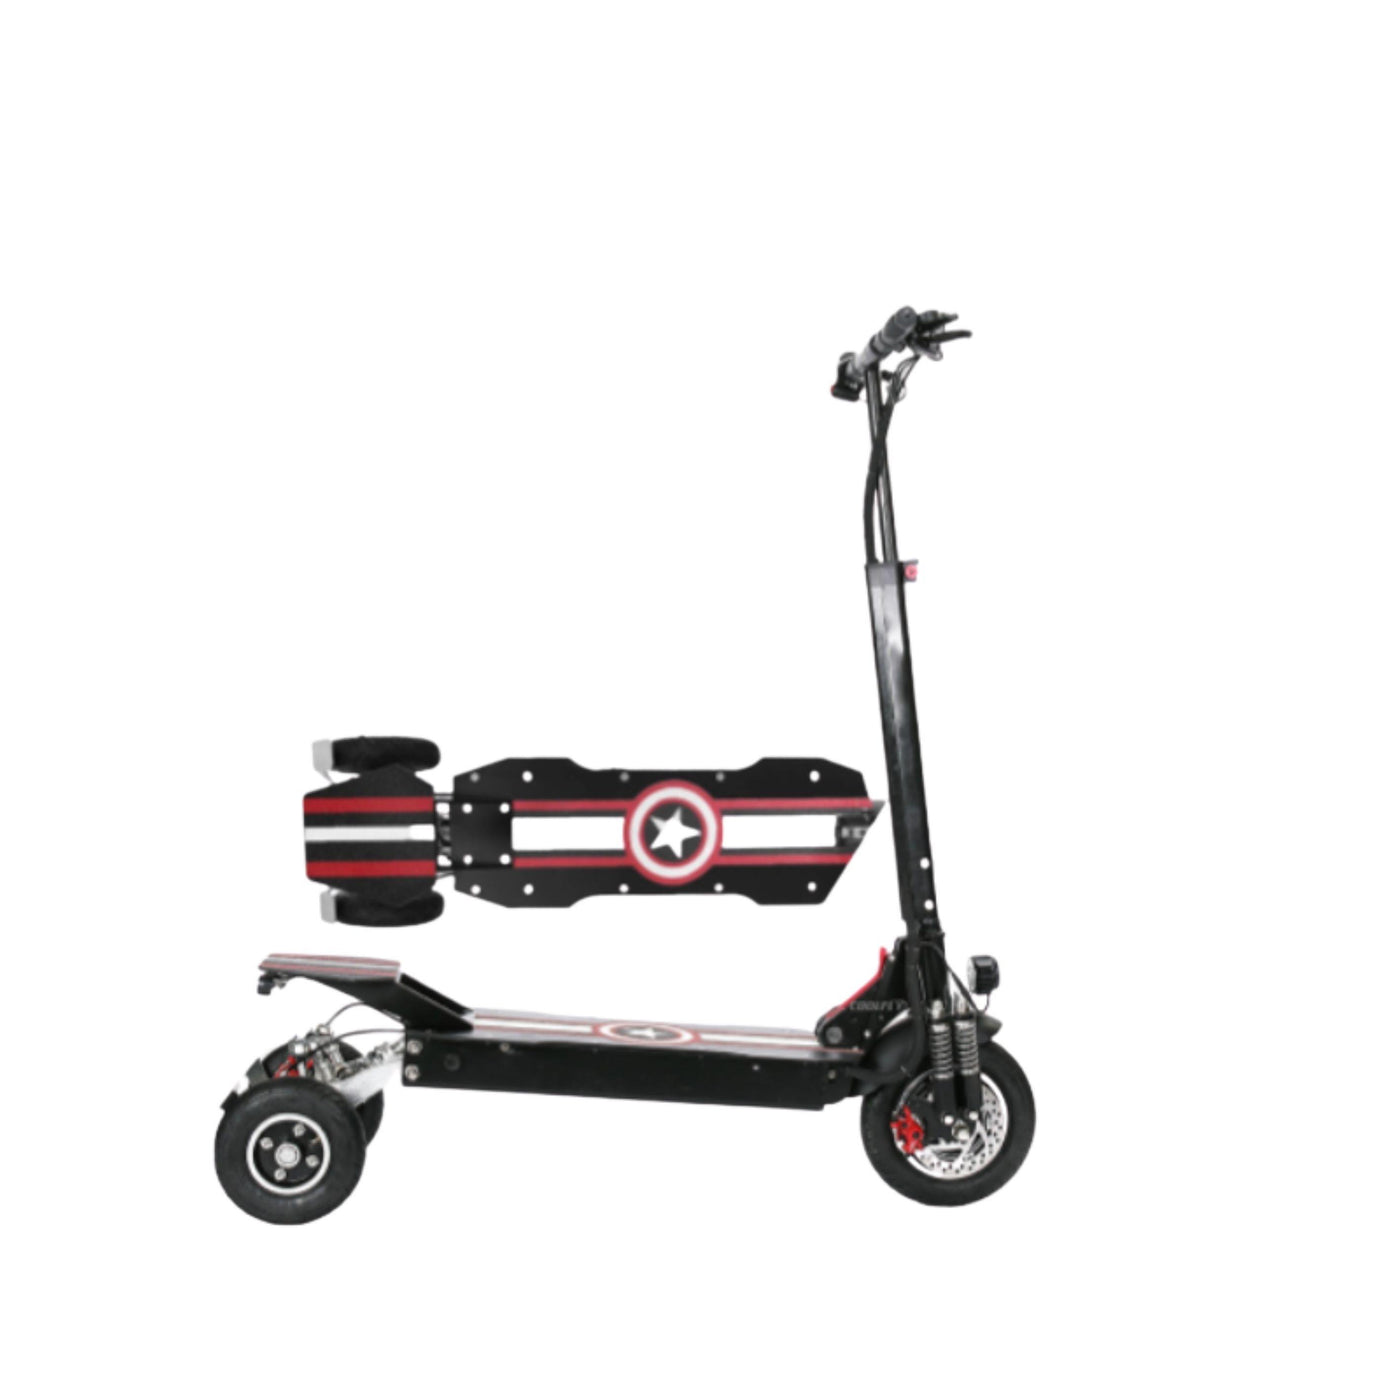 CoolFly-T10-1000w 48v 3 Wheel Folding Scooter – Electric City Rides